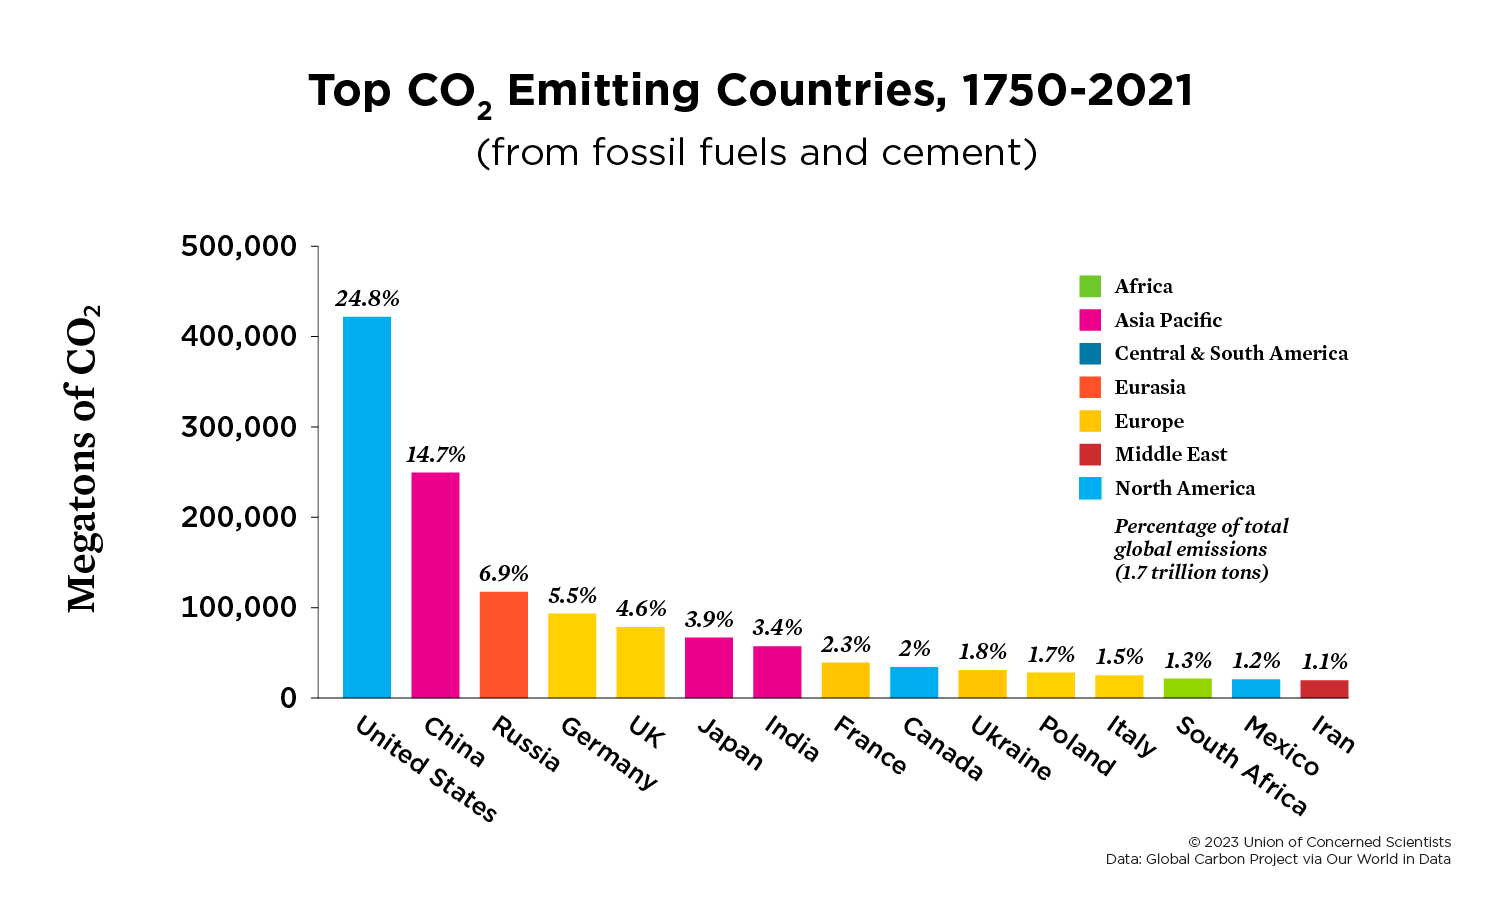 A graph of the top CO2 emitting countries from 1750 to 2021.